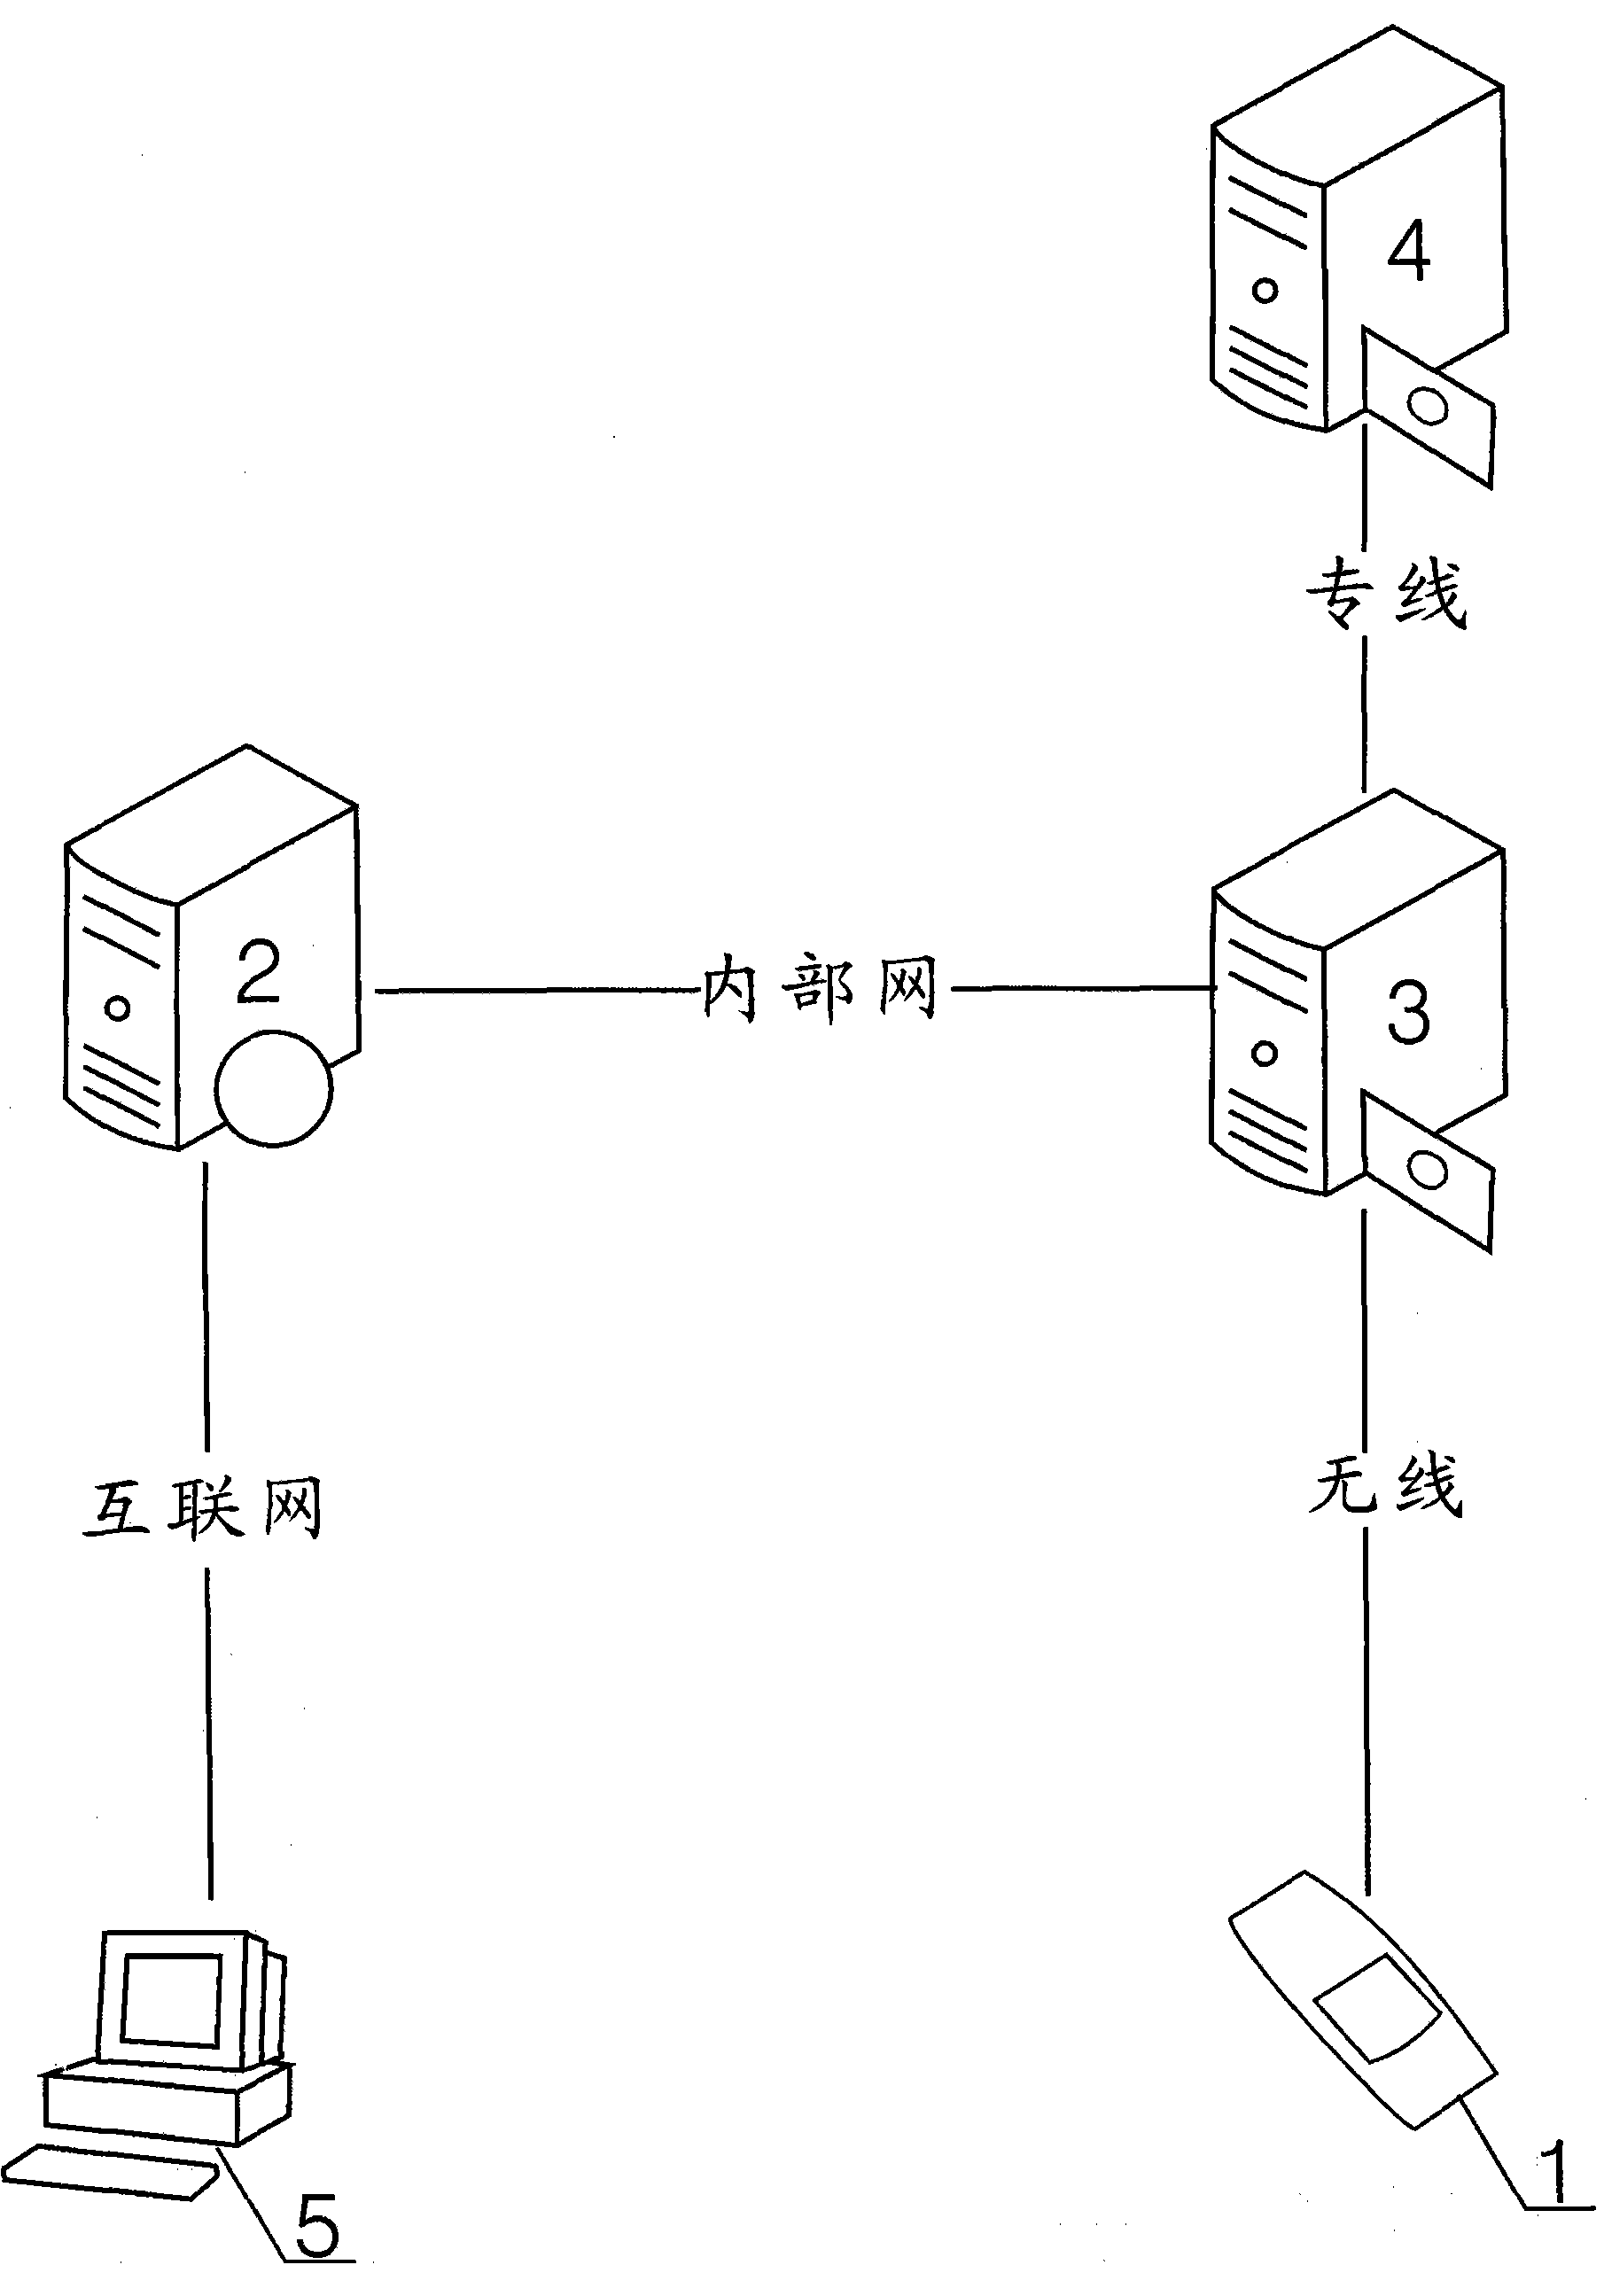 Catering payment integrated management system and implementation method thereof